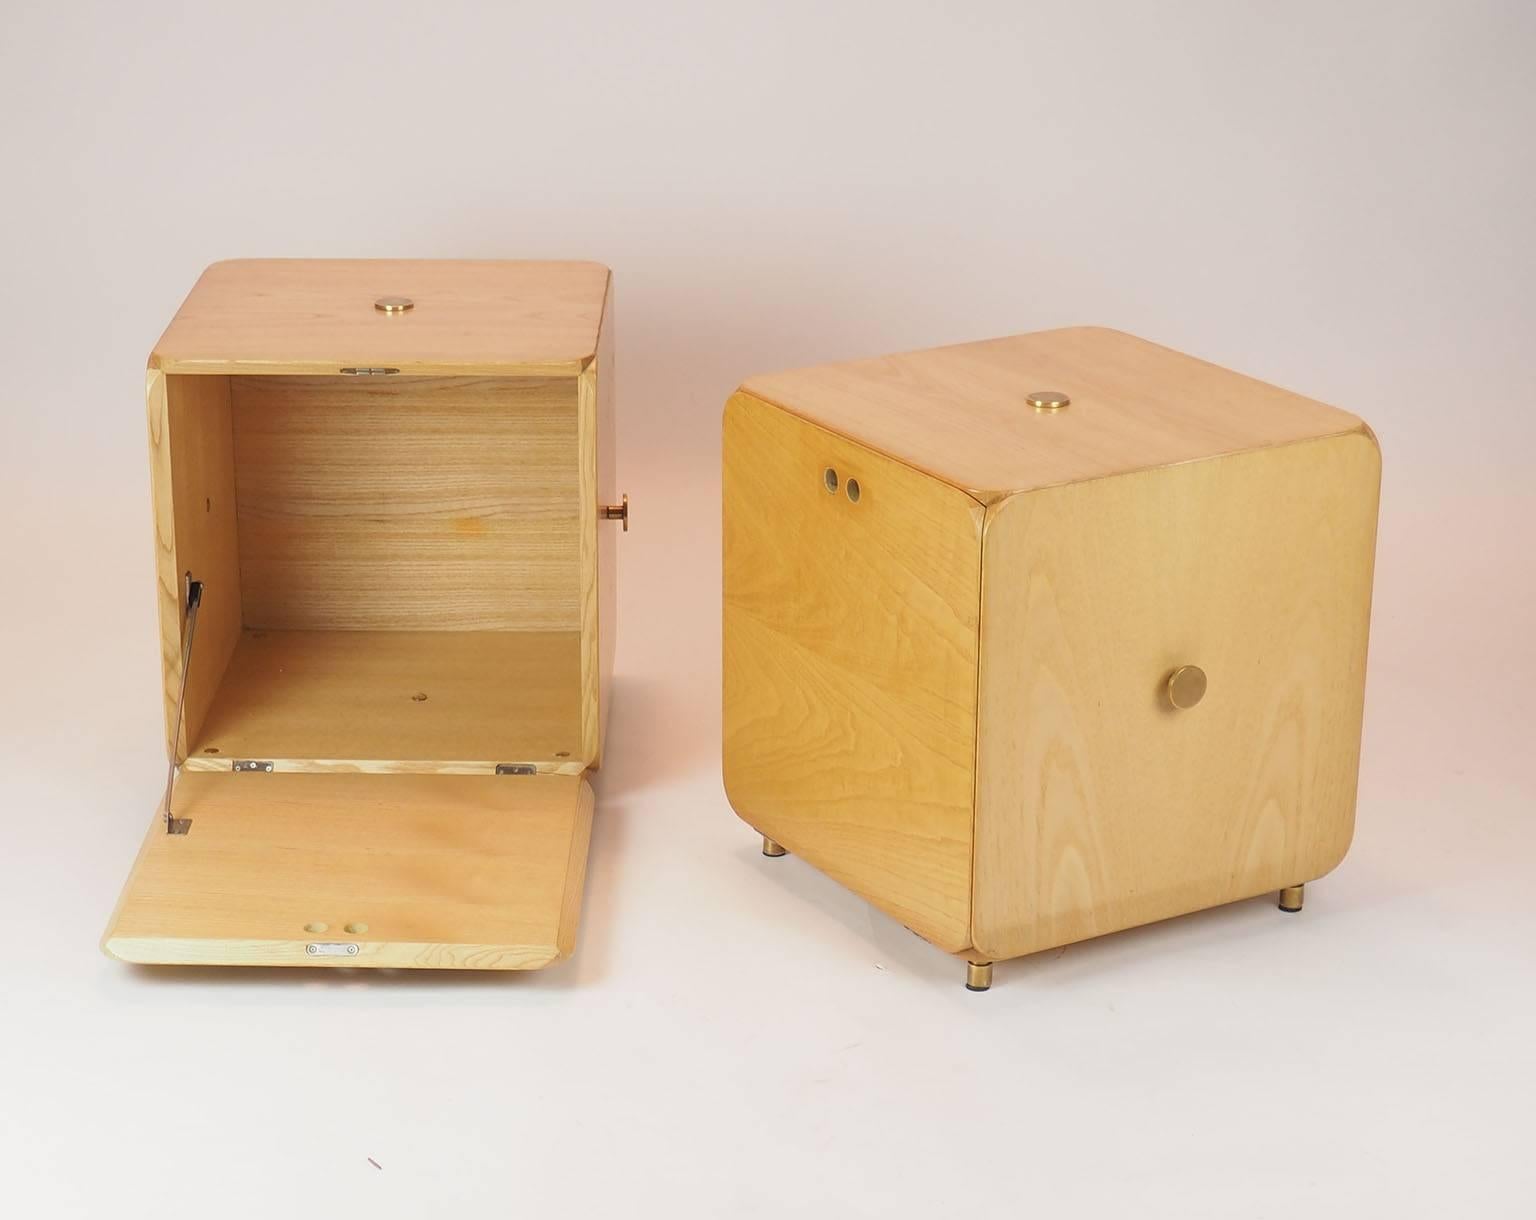 Italian Pair of  wood 'Cube' Cabinet  Nightstands Produced  in Italy by Maisa in  1969